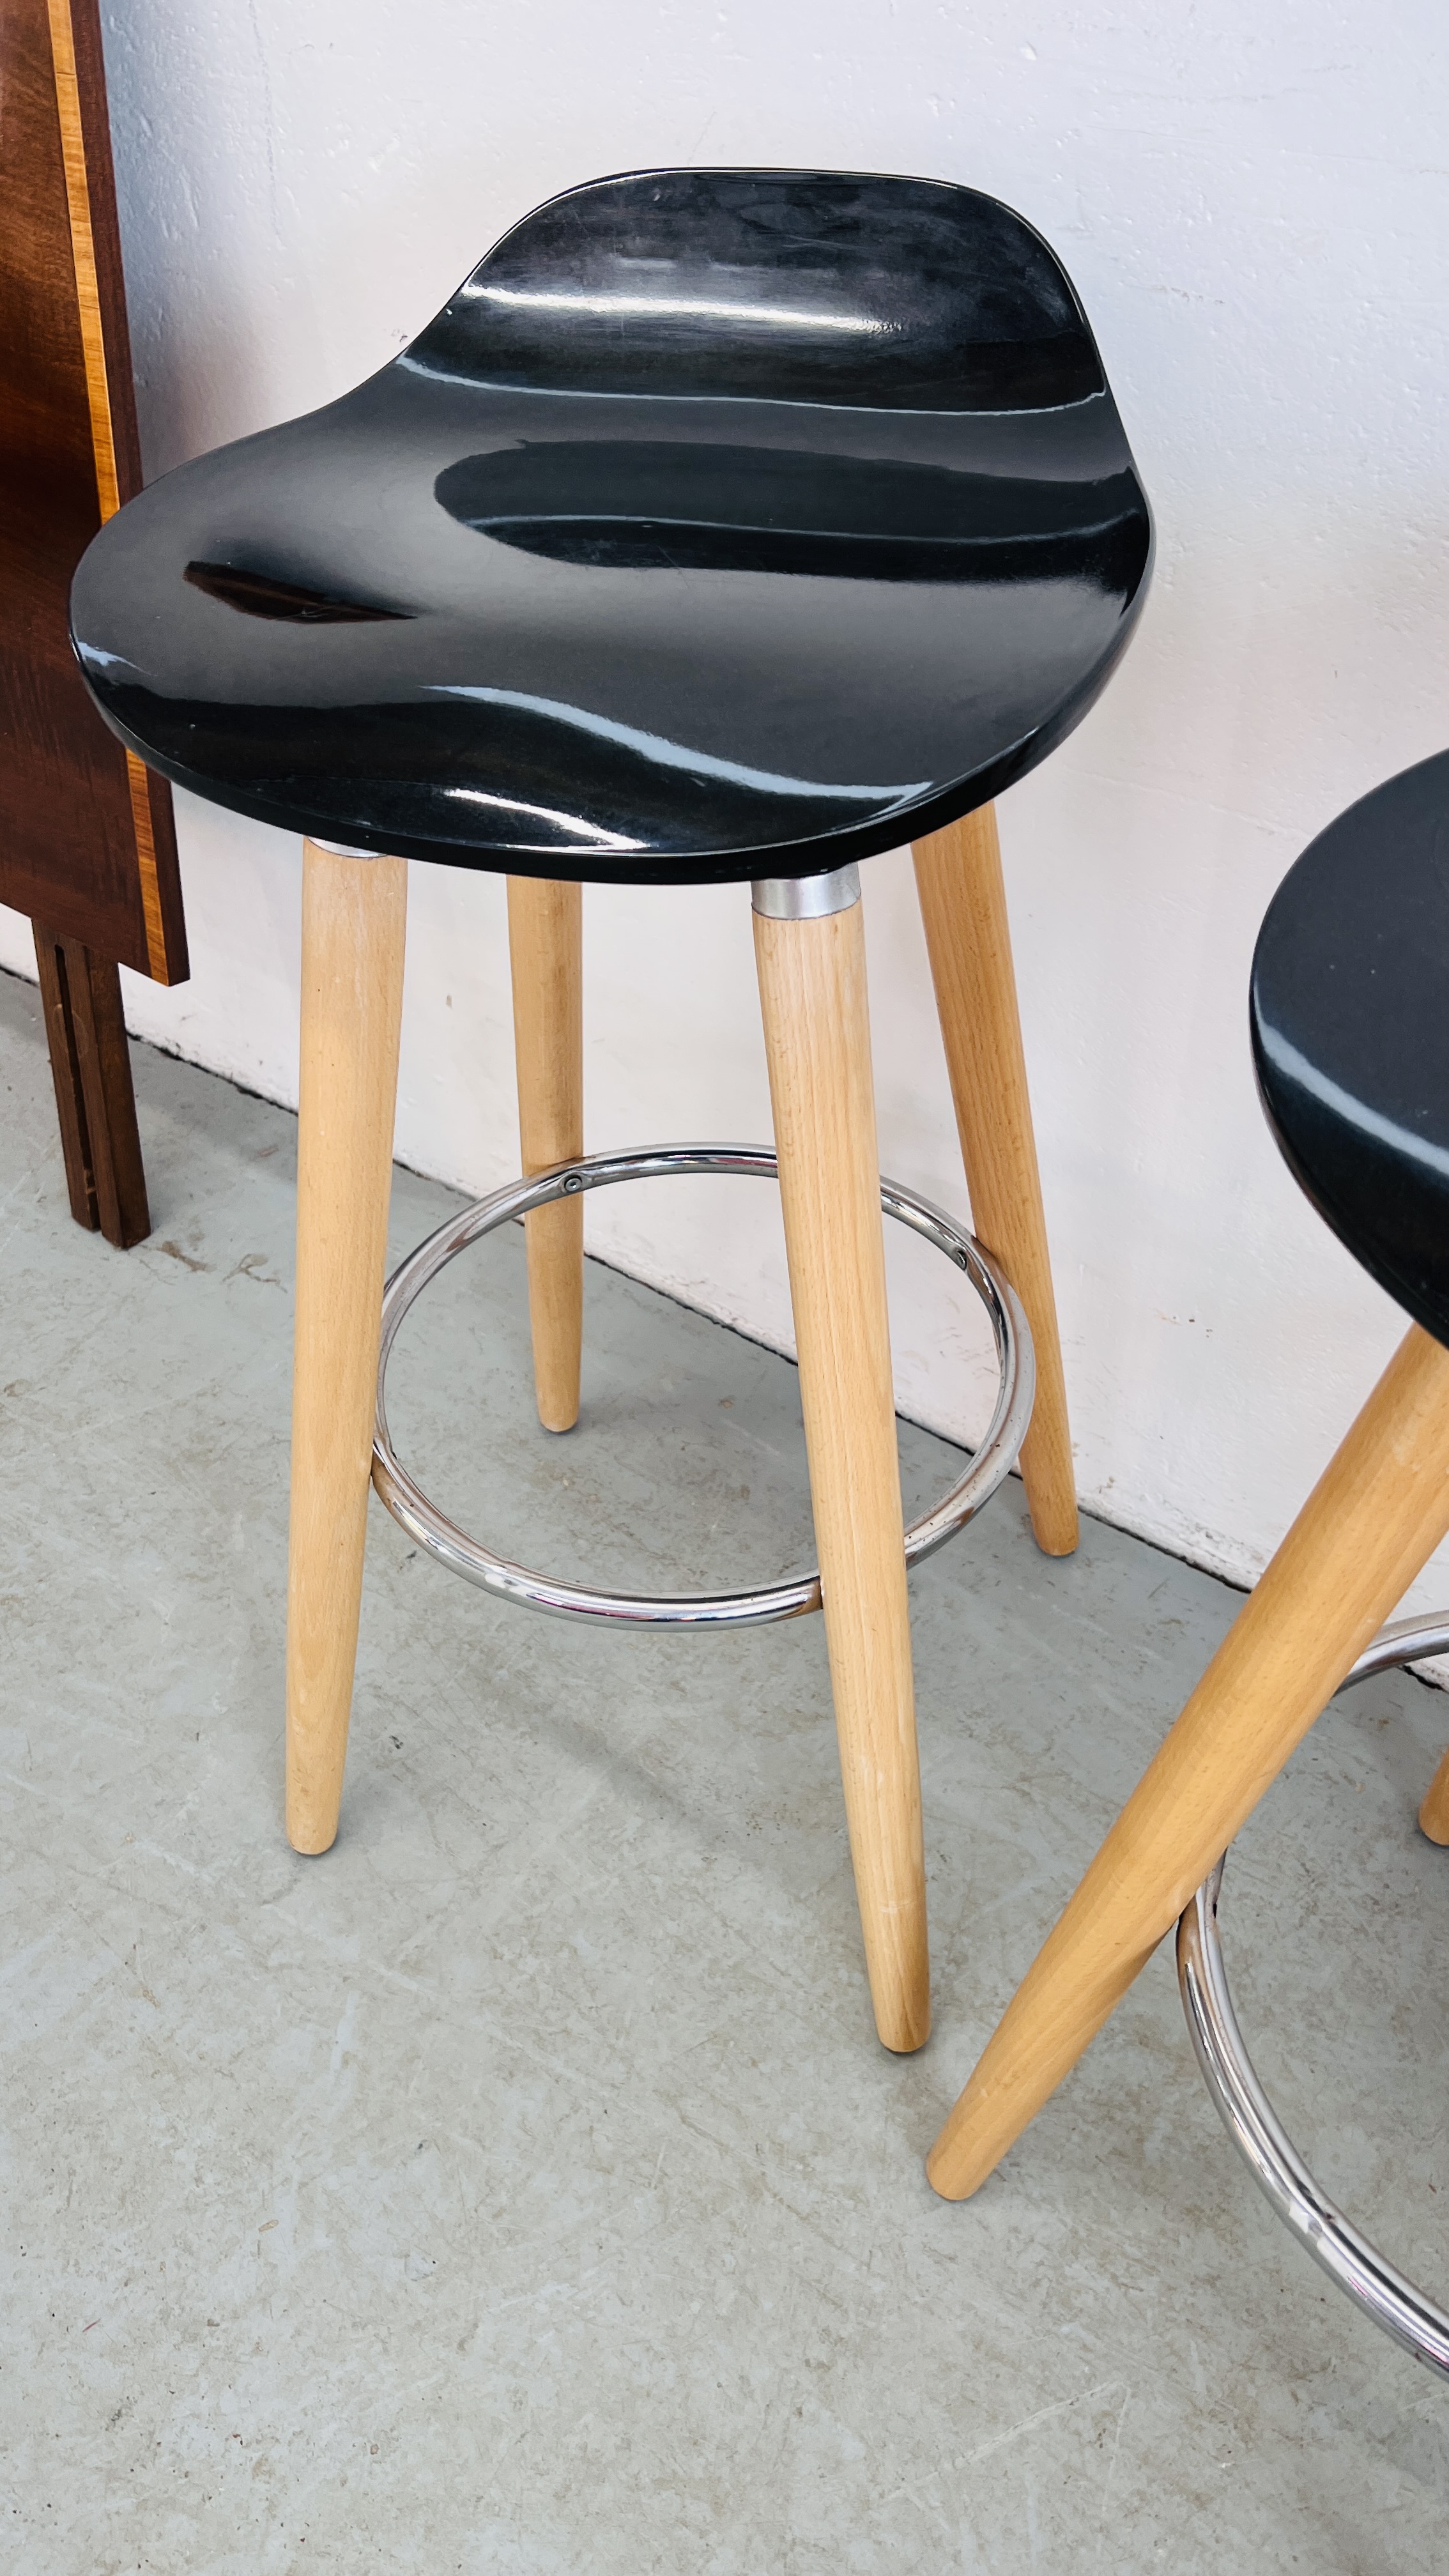 A PAIR OF PINE AND BLACK BREAKFAST BAR STOOLS. - Image 5 of 5